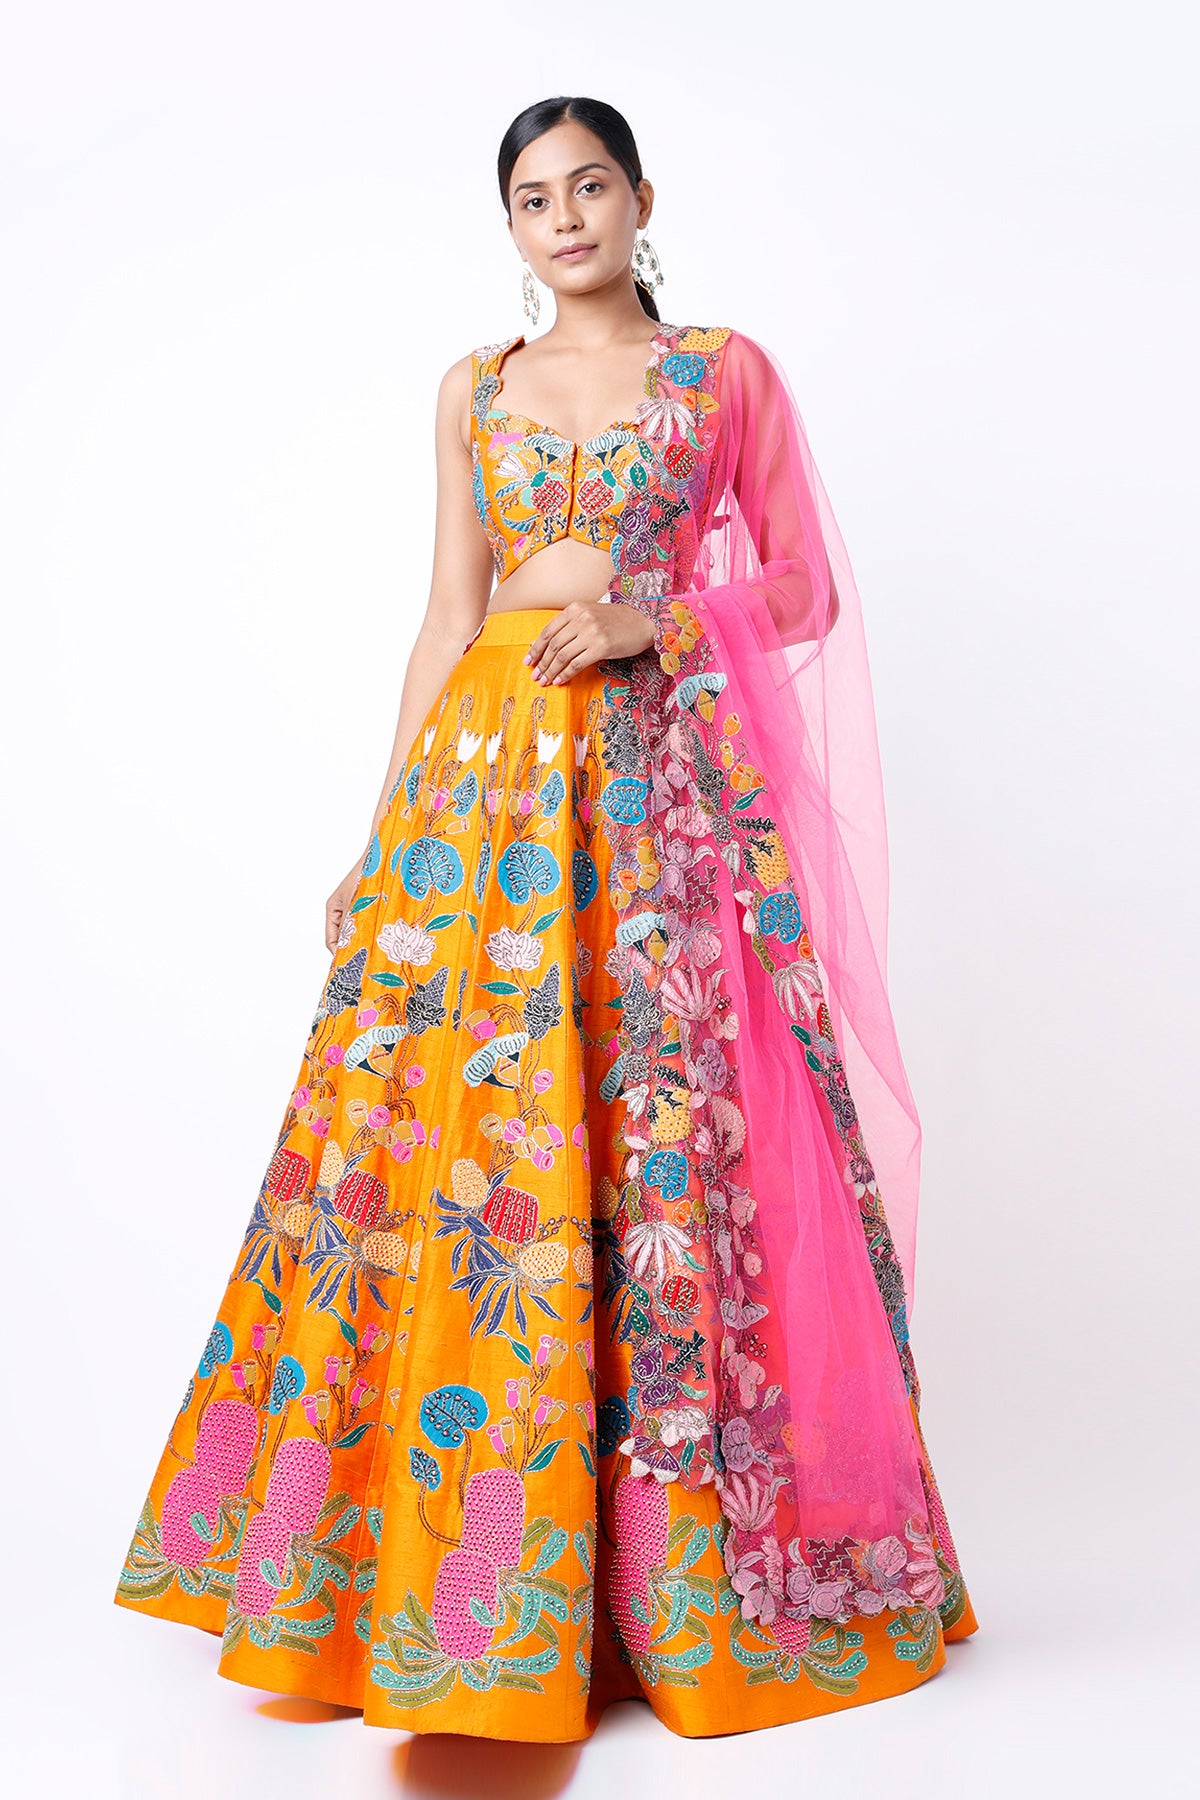 Orange Pastiche Raw Silk Appliquéd And Embellished Lehenga With Blouse And Cutwork Tulle Dupatta